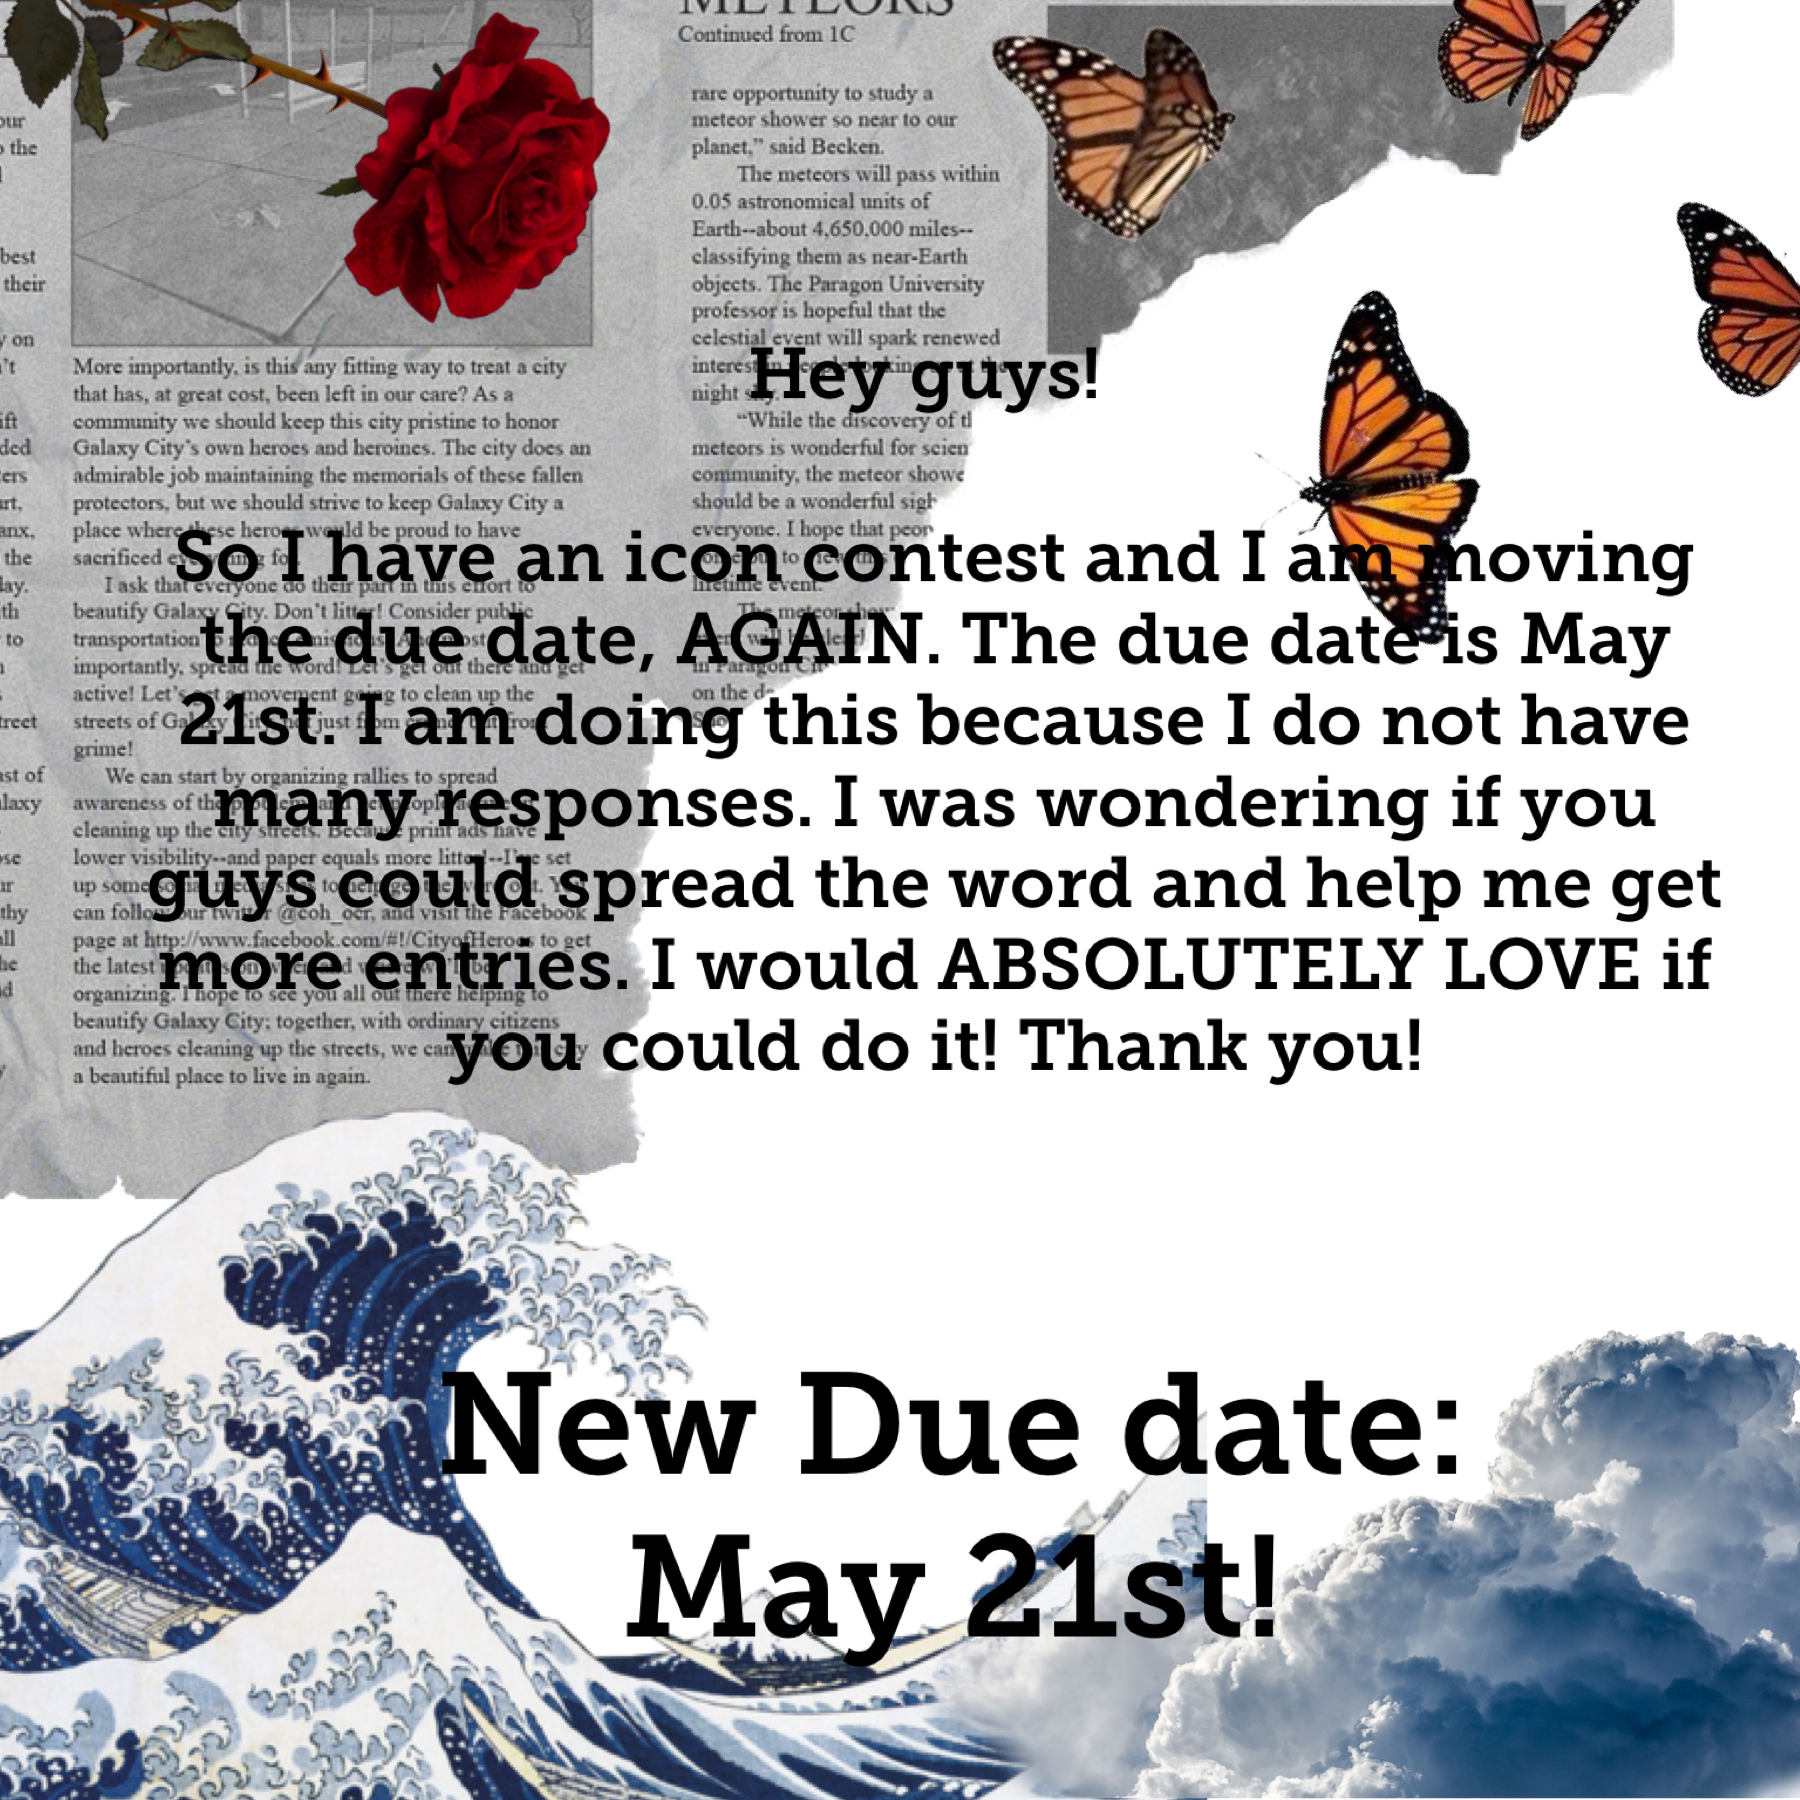 Hey! Please spread the word and new due date is May 21st!!